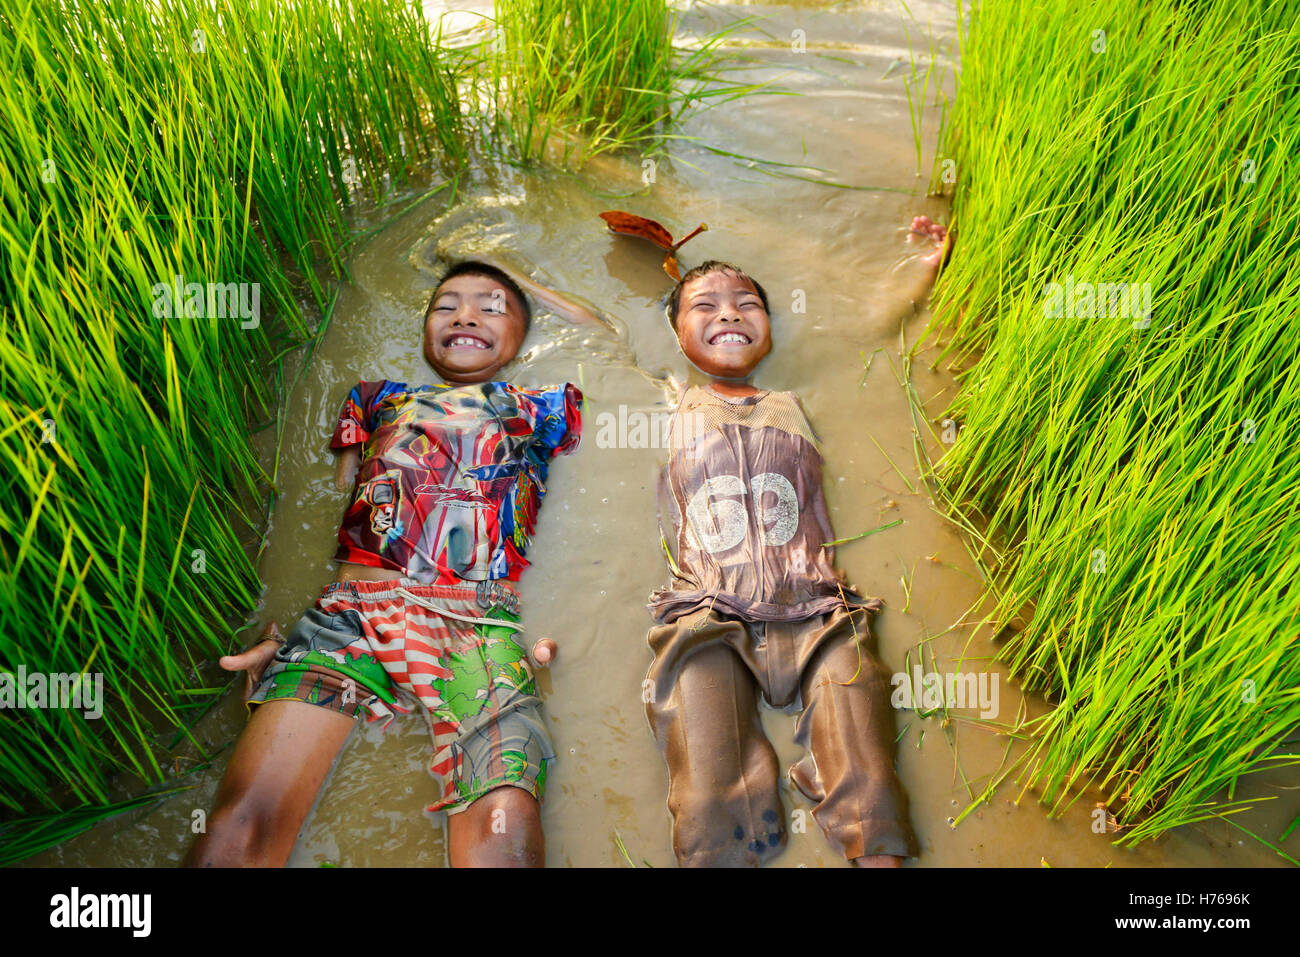 Two boys lying in water in a paddy field, Thailand Stock Photo